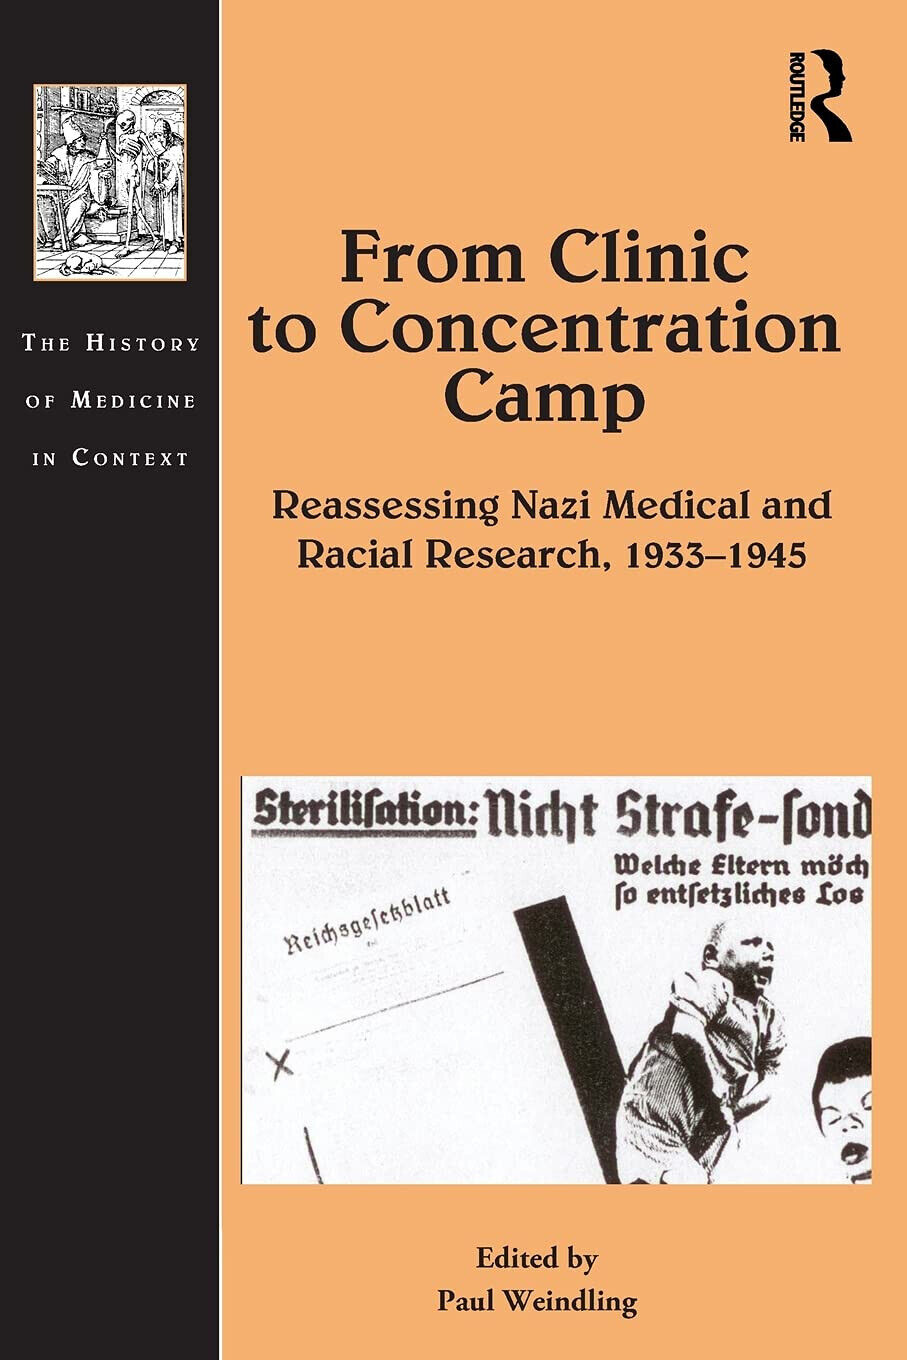 From Clinic To Concentration Camp -  Paul Weindling - 2021